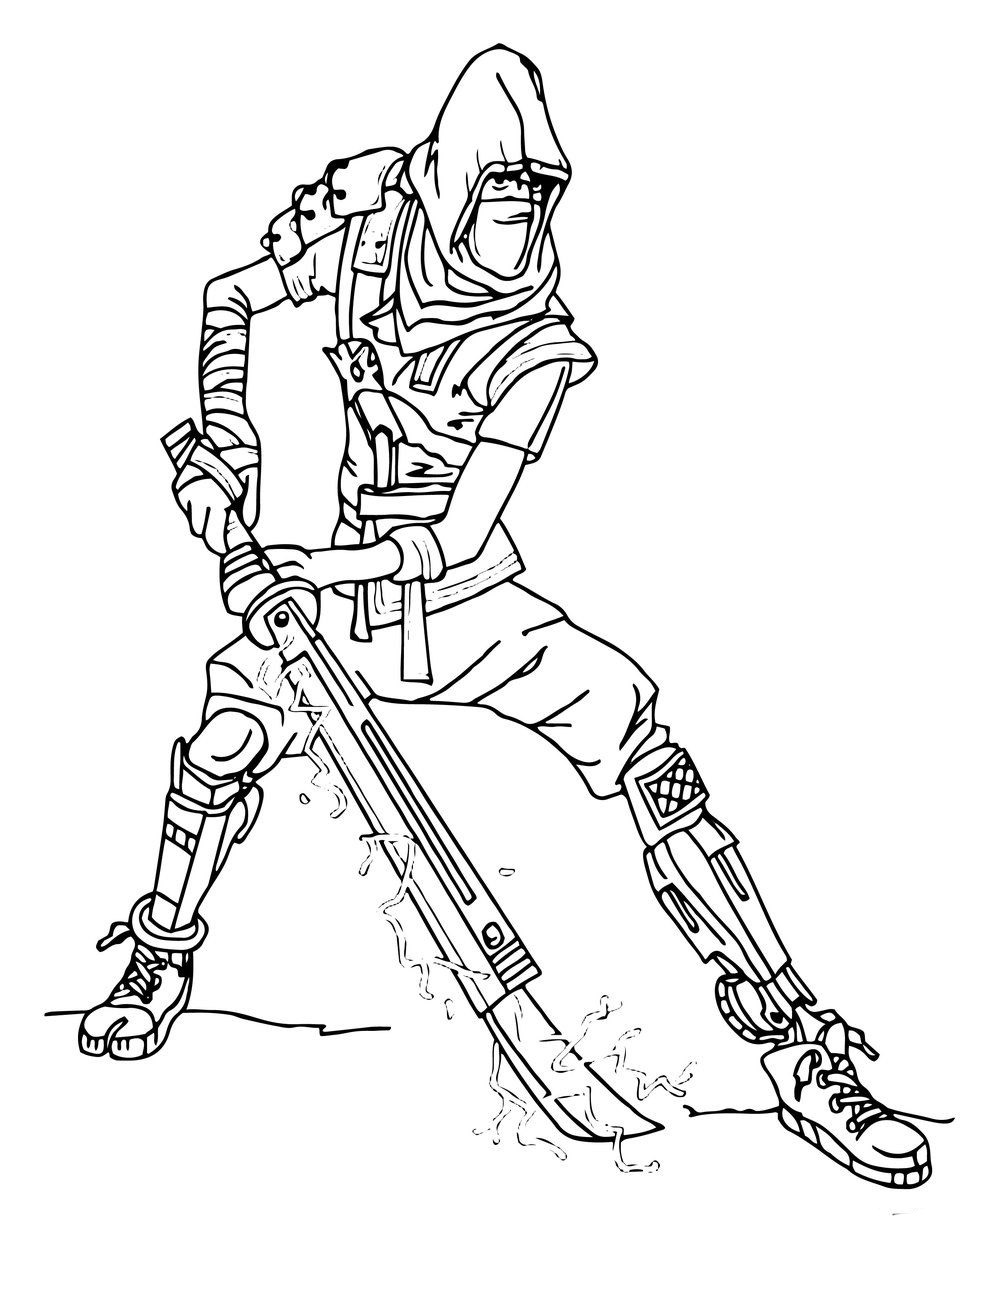 Pro ninja Coloring Page   Free Printable Coloring Pages for Kids